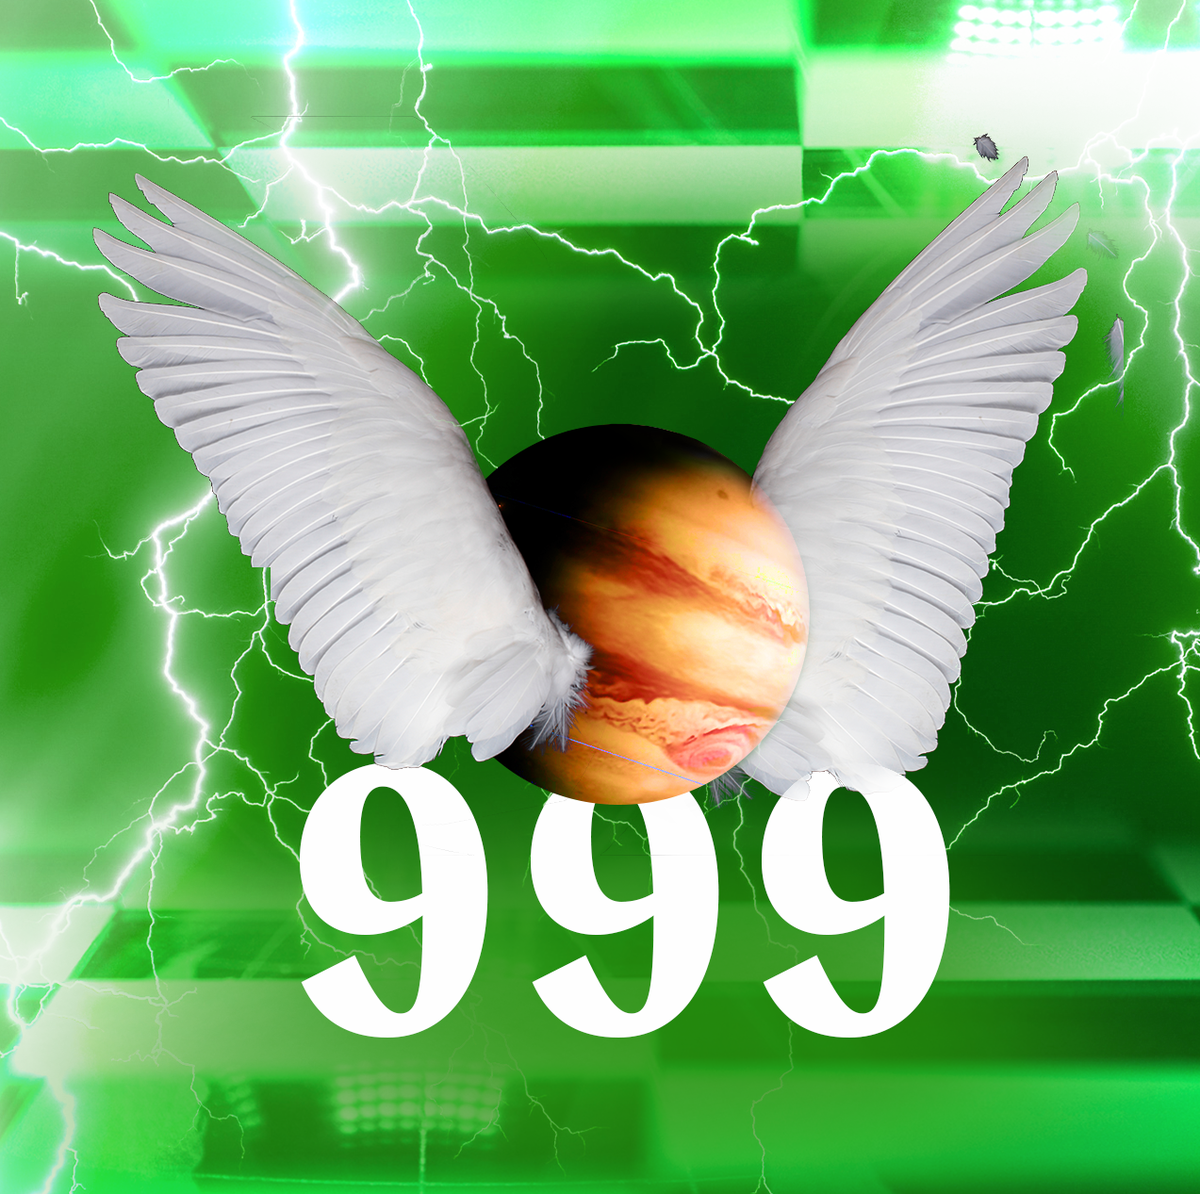 Angel Number 999 Meaning in Love and Life: What Does 999 Mean?